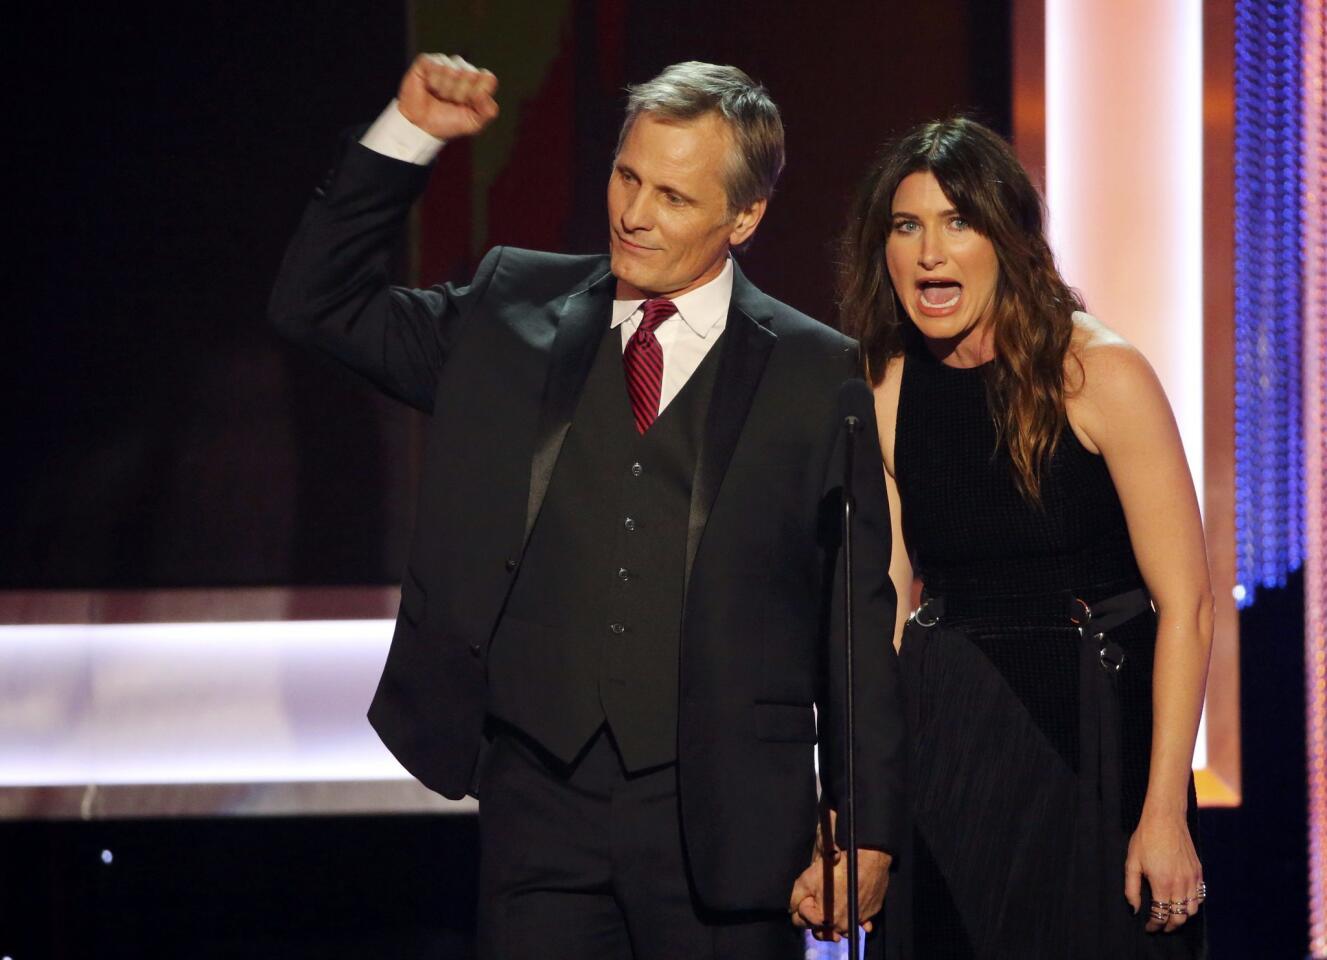 Viggo Mortensen and Kathryn Hahn present an award during the 23rd Screen Actors Guild Awards in Los Angeles